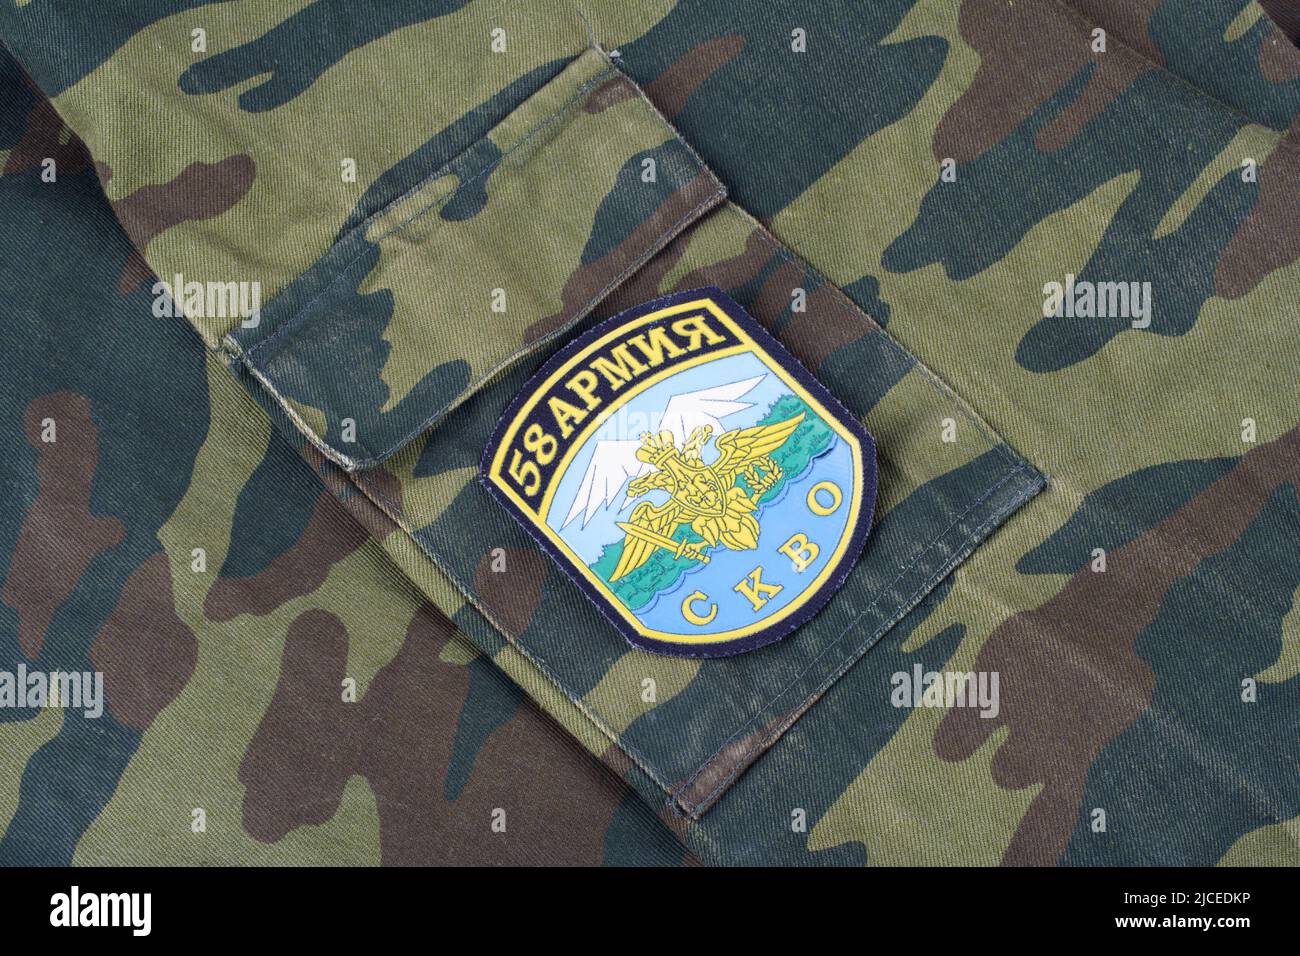 KYIV, UKRAINE - Feb. 25, 2017. Russian Army North Caucasus Military District uniform badge '58th Army' on camouflage unoform background Stock Photo